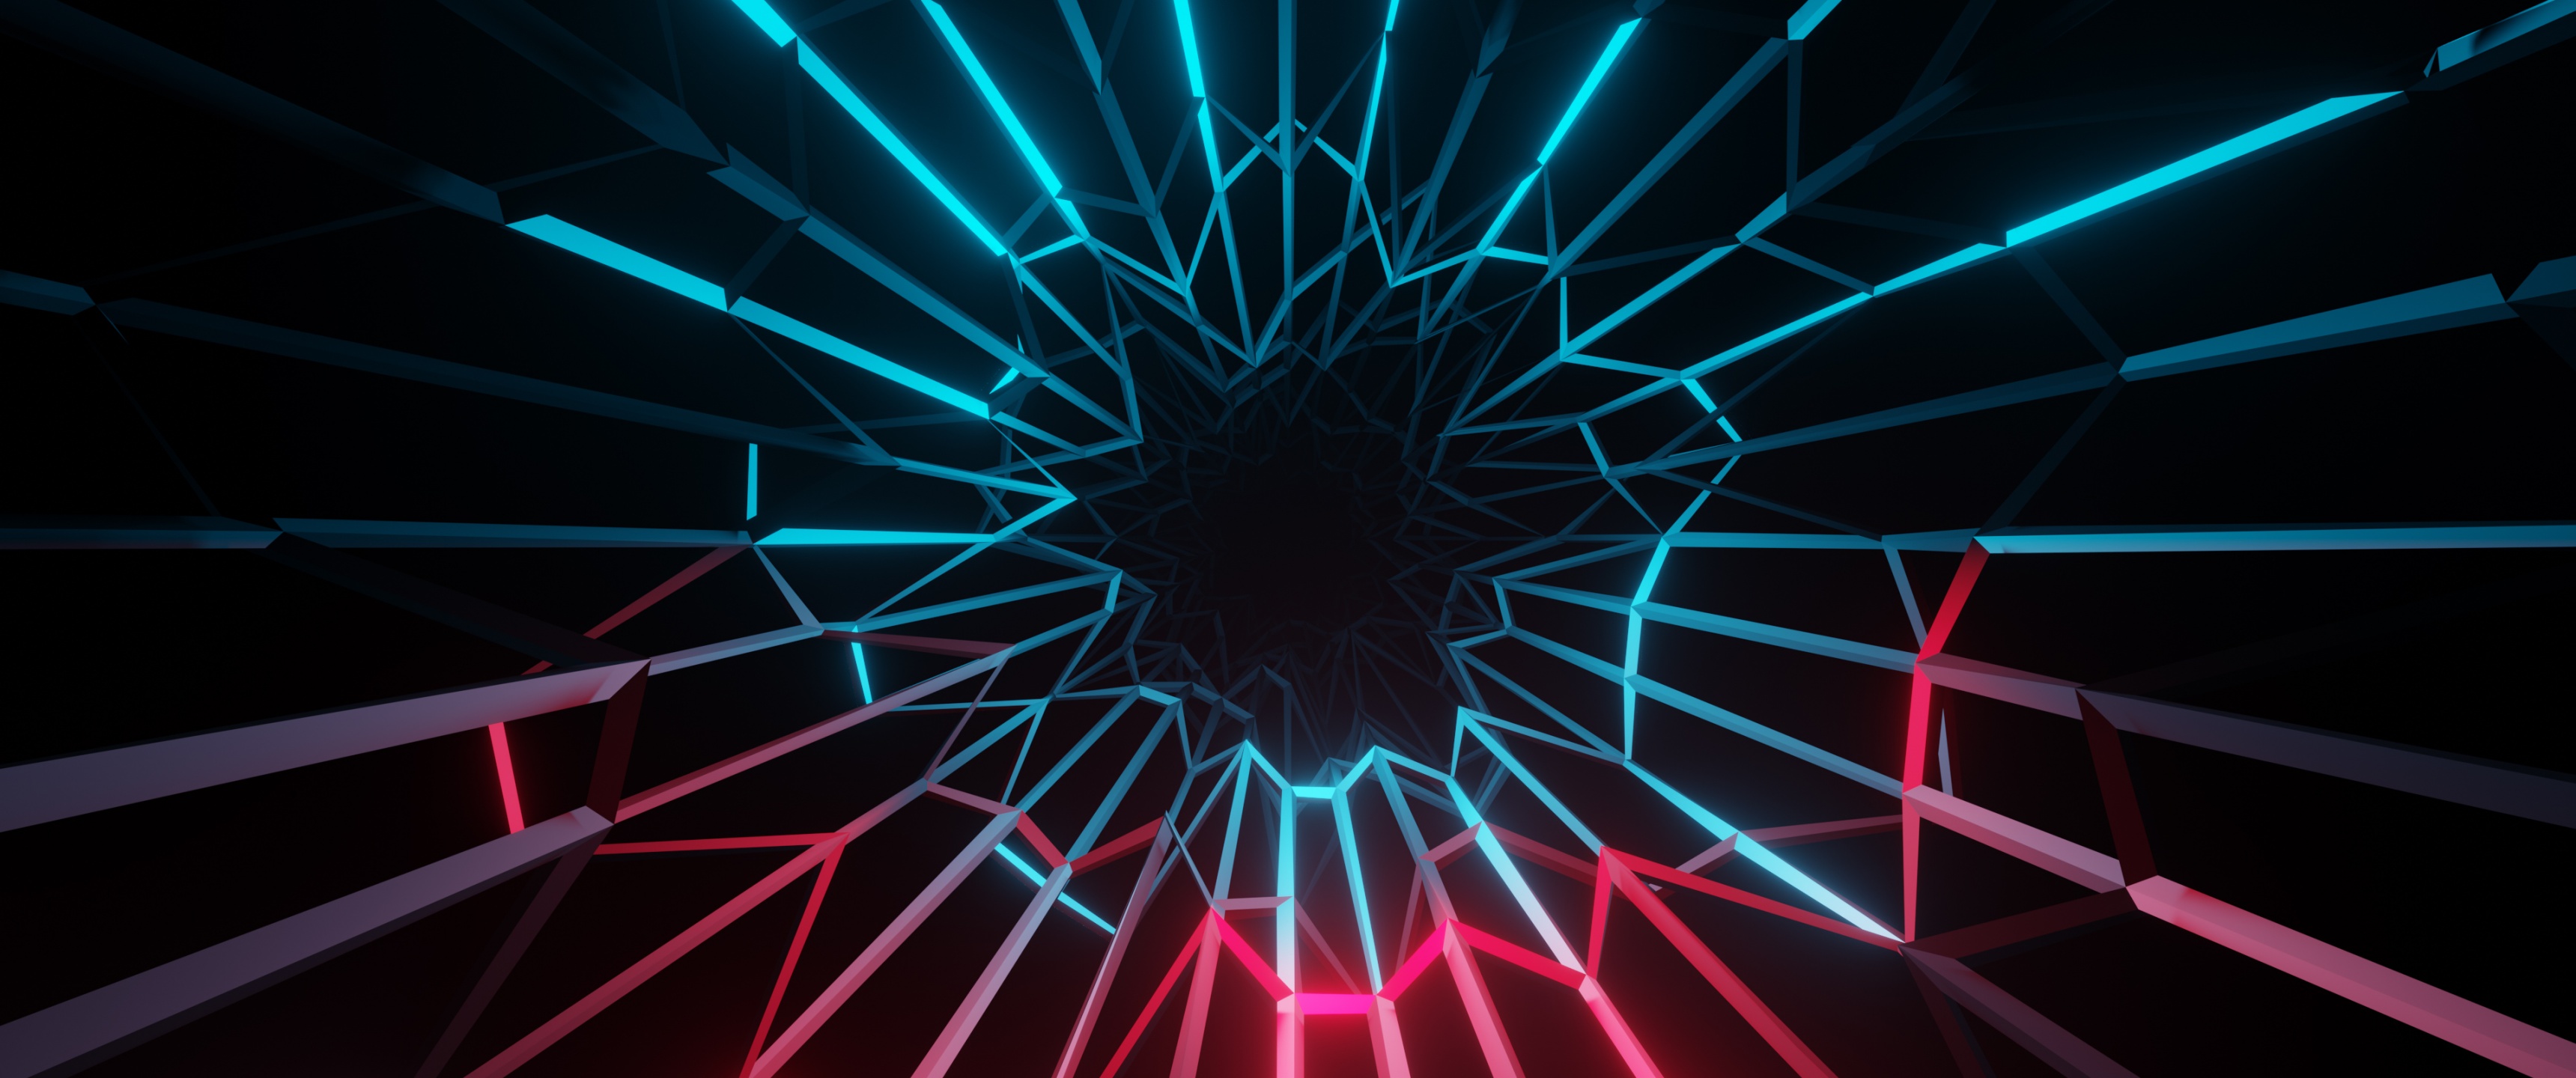 Electric Wallpaper 4K, Neon, Colorful, Dark background, Lighting, Abstract